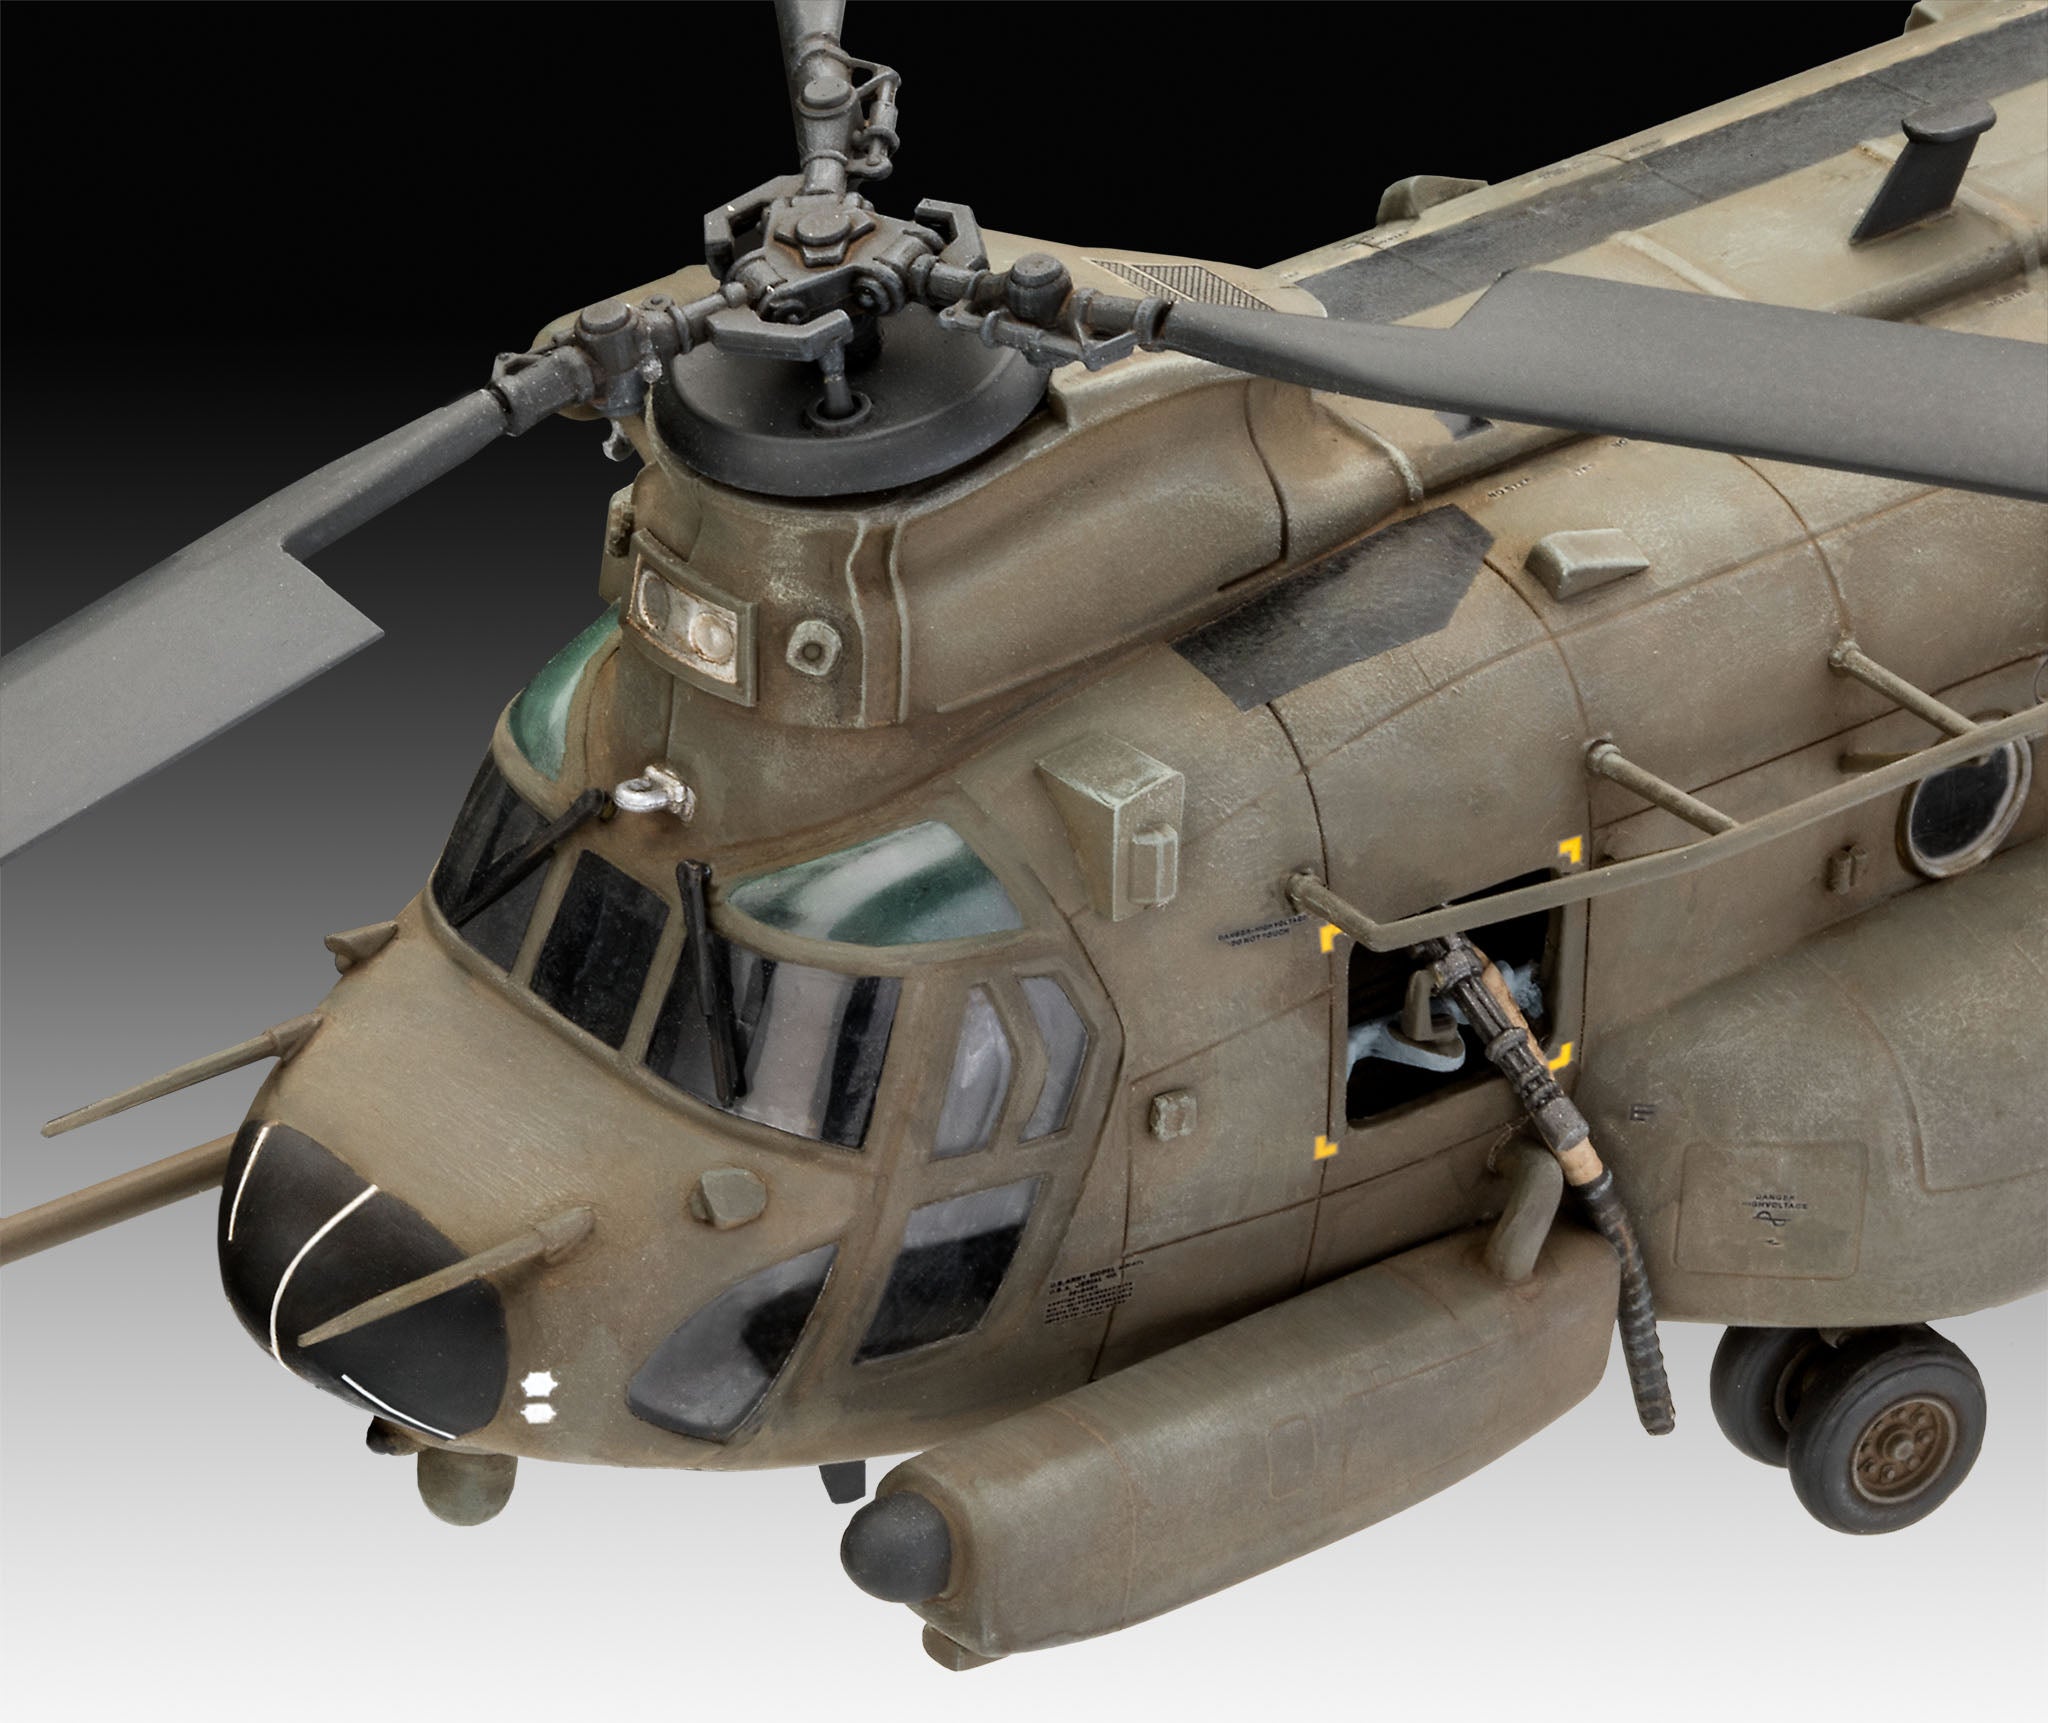 chinook model helicopter